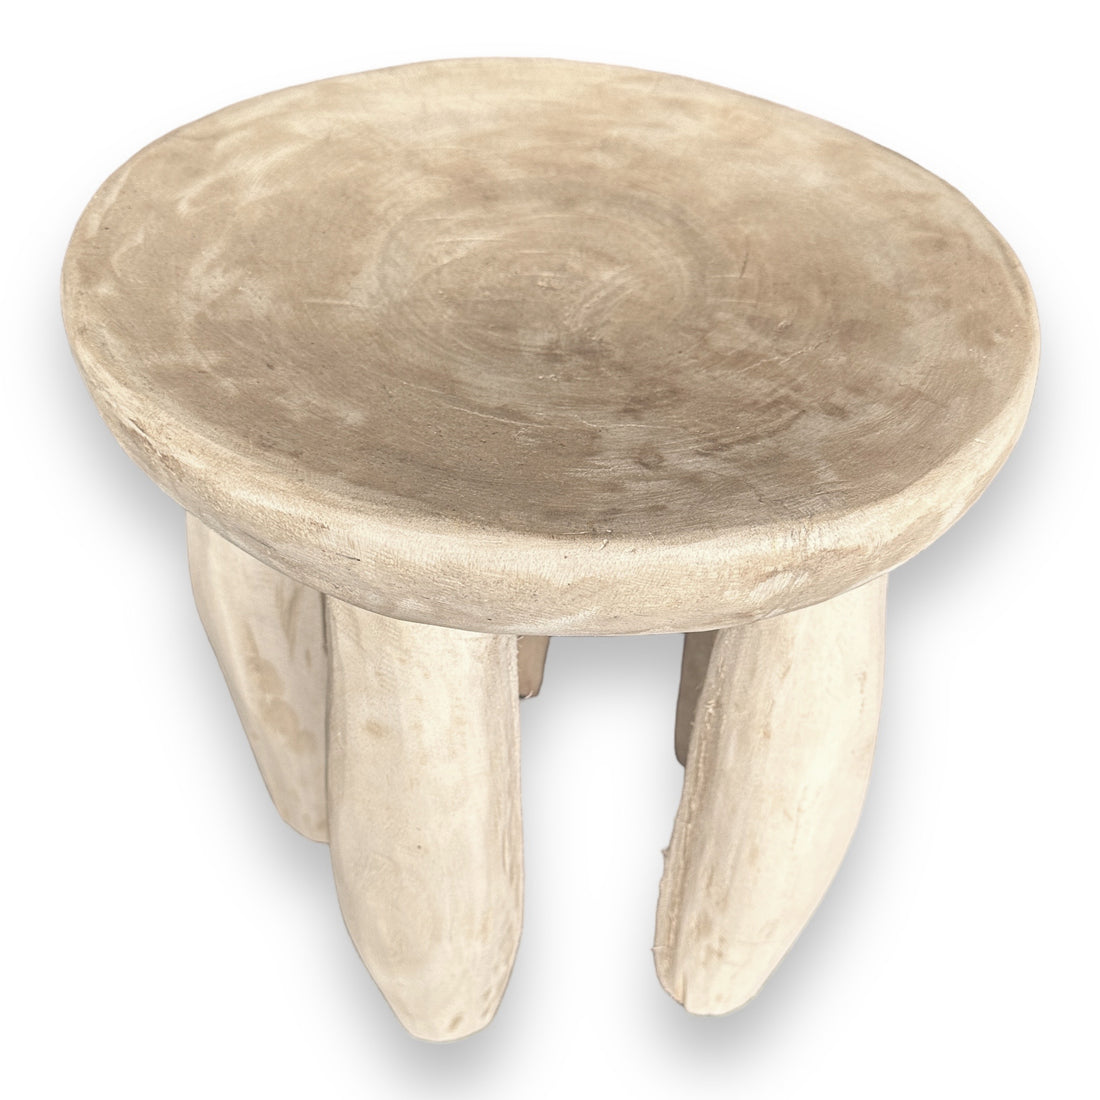 Wooden Side Tables/Stools - Natural